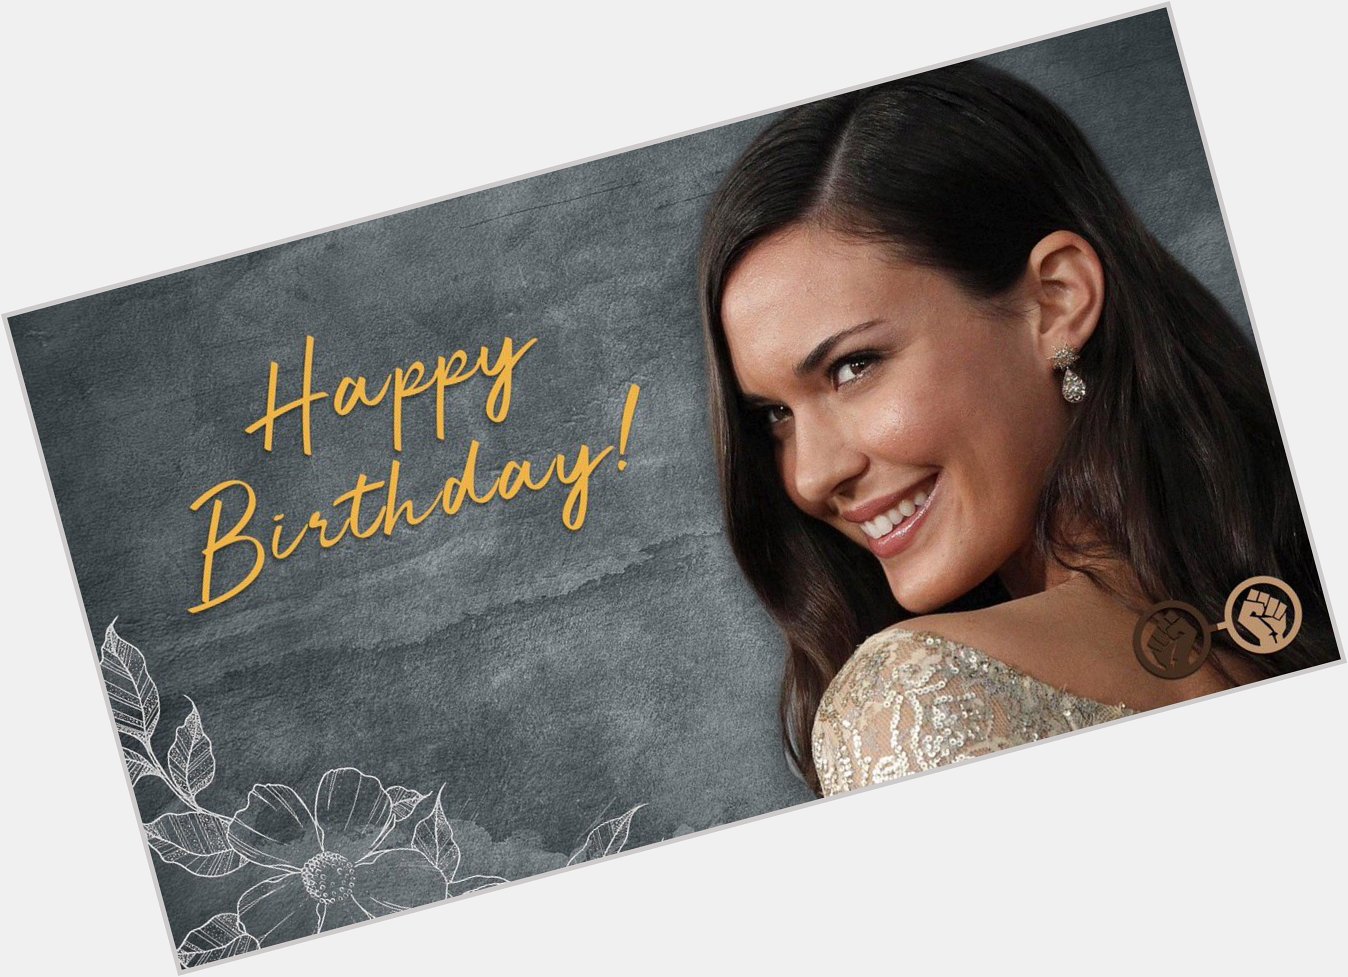 Happy birthday to Odette Annable a.k.a Reign! The \Supergirl\ actress turns 35 today! 